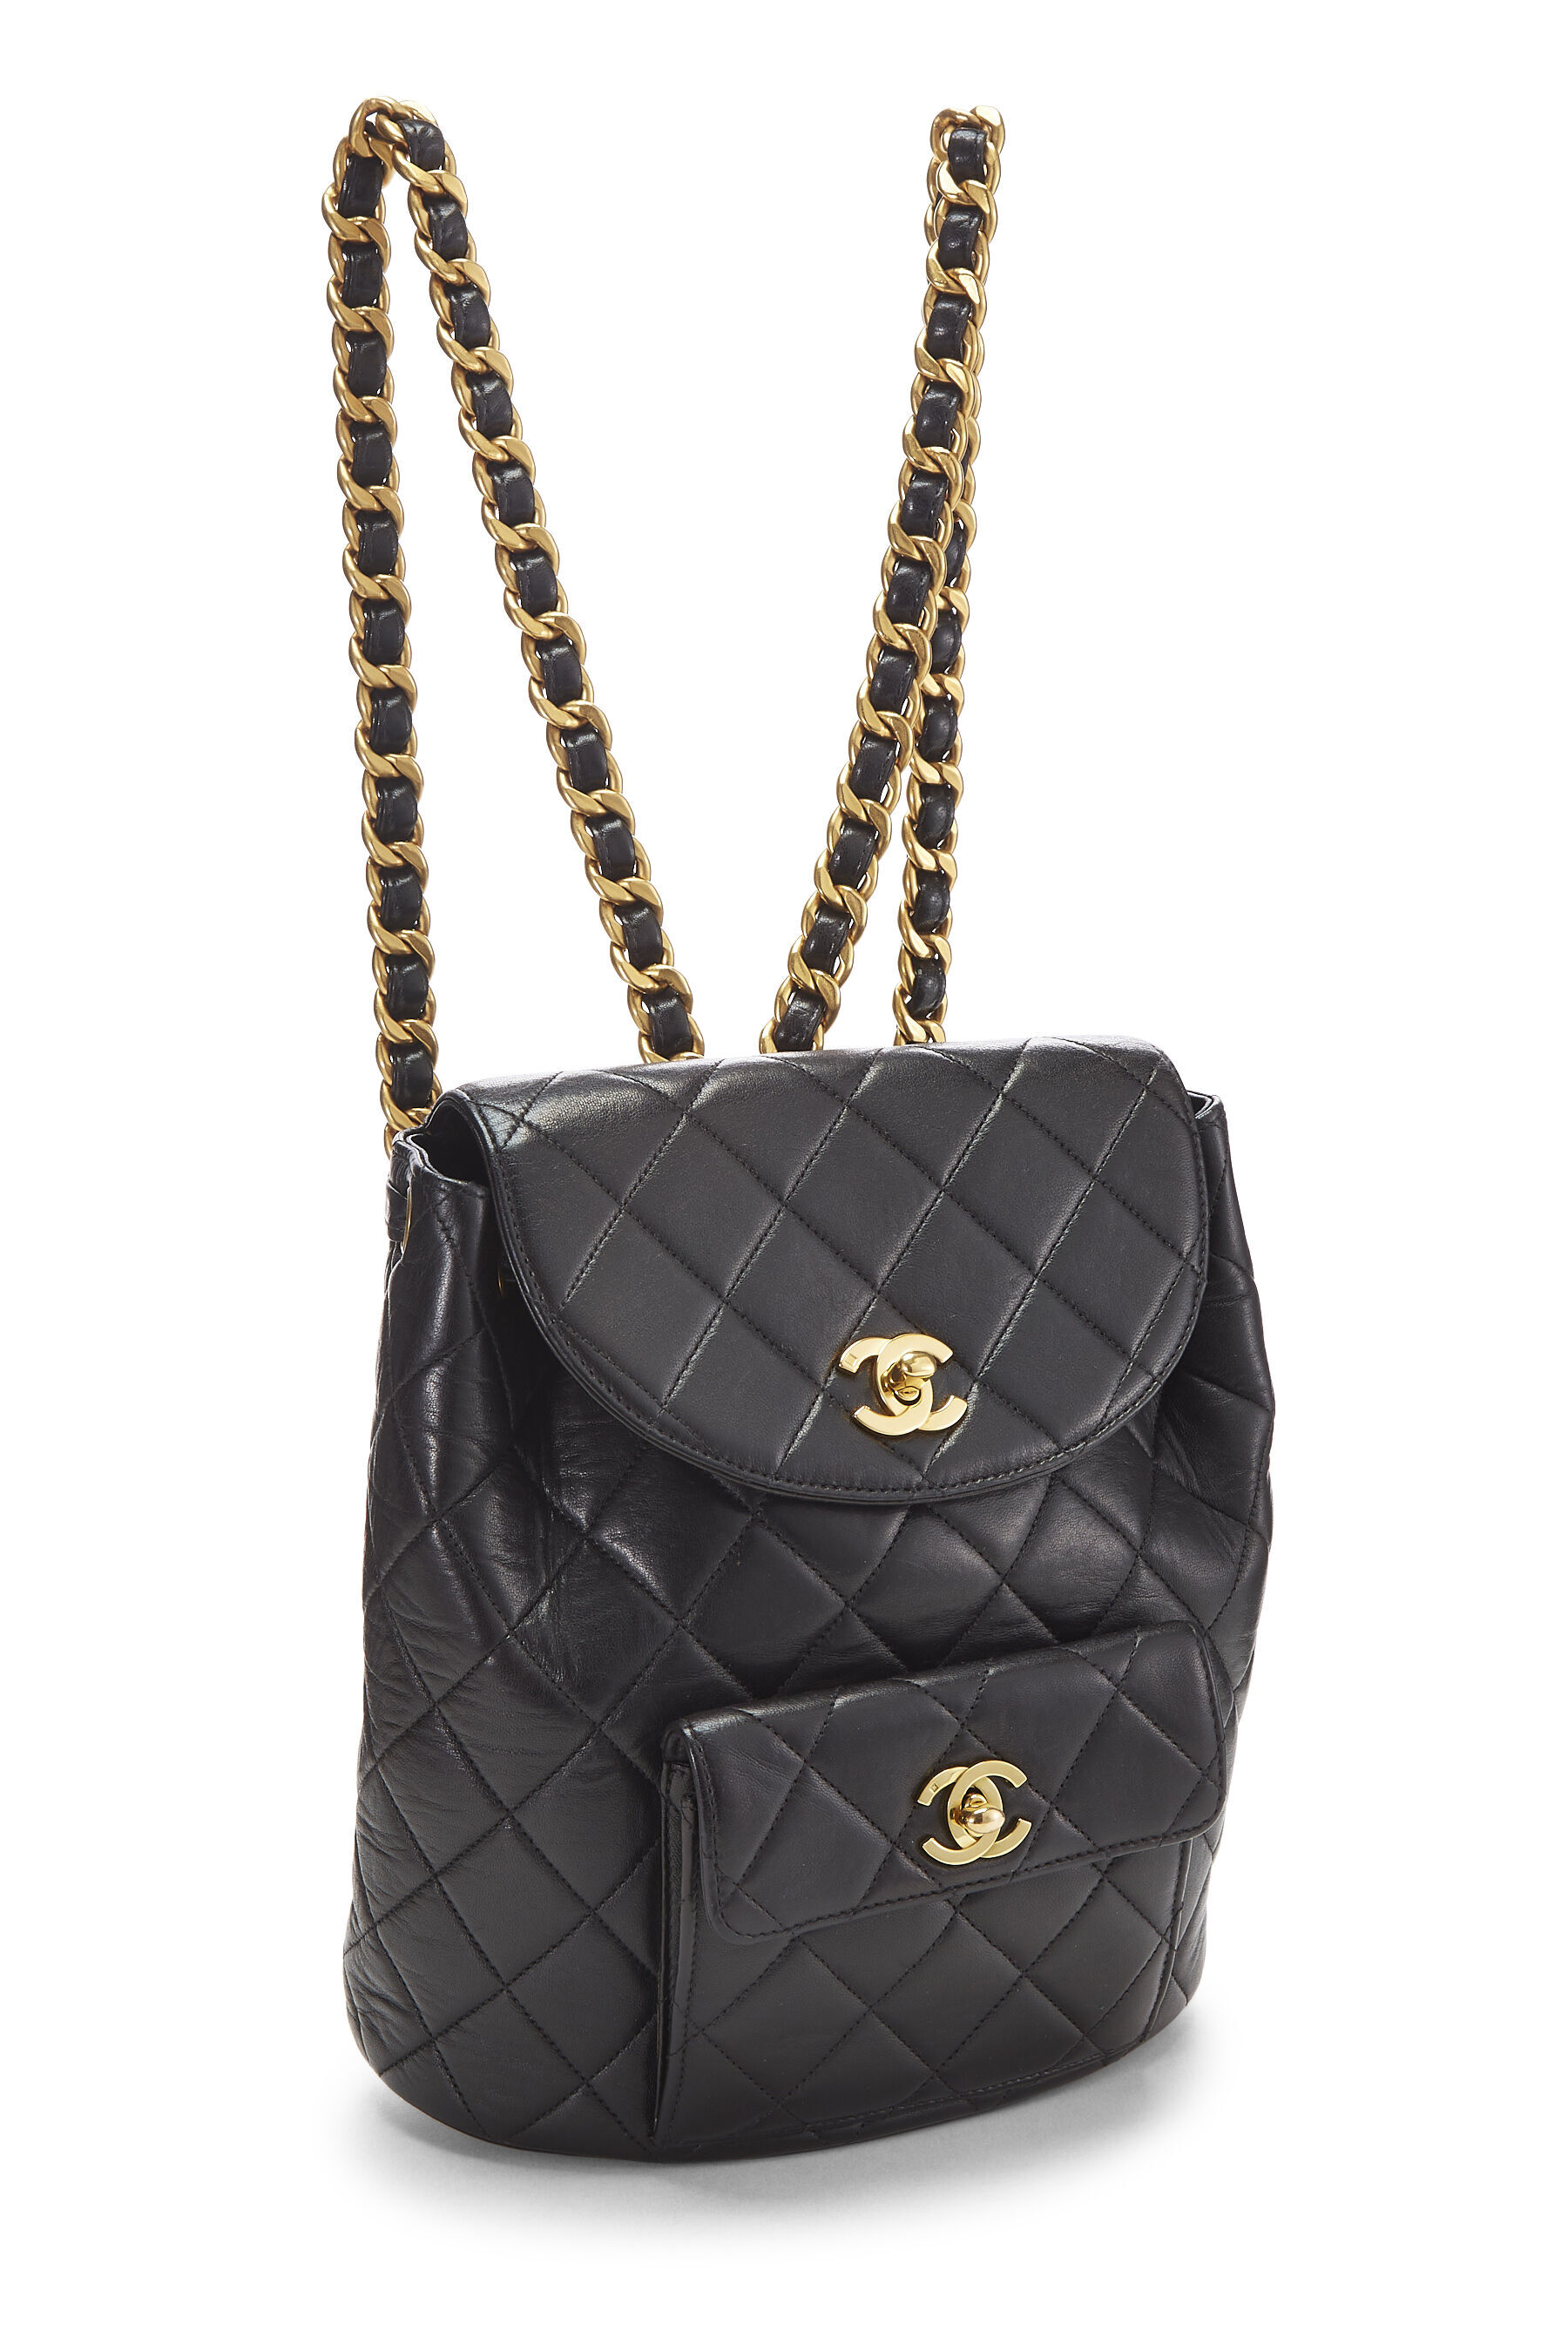 Chanel Black Quilted Lambskin 'CC' Classic Backpack Medium ...